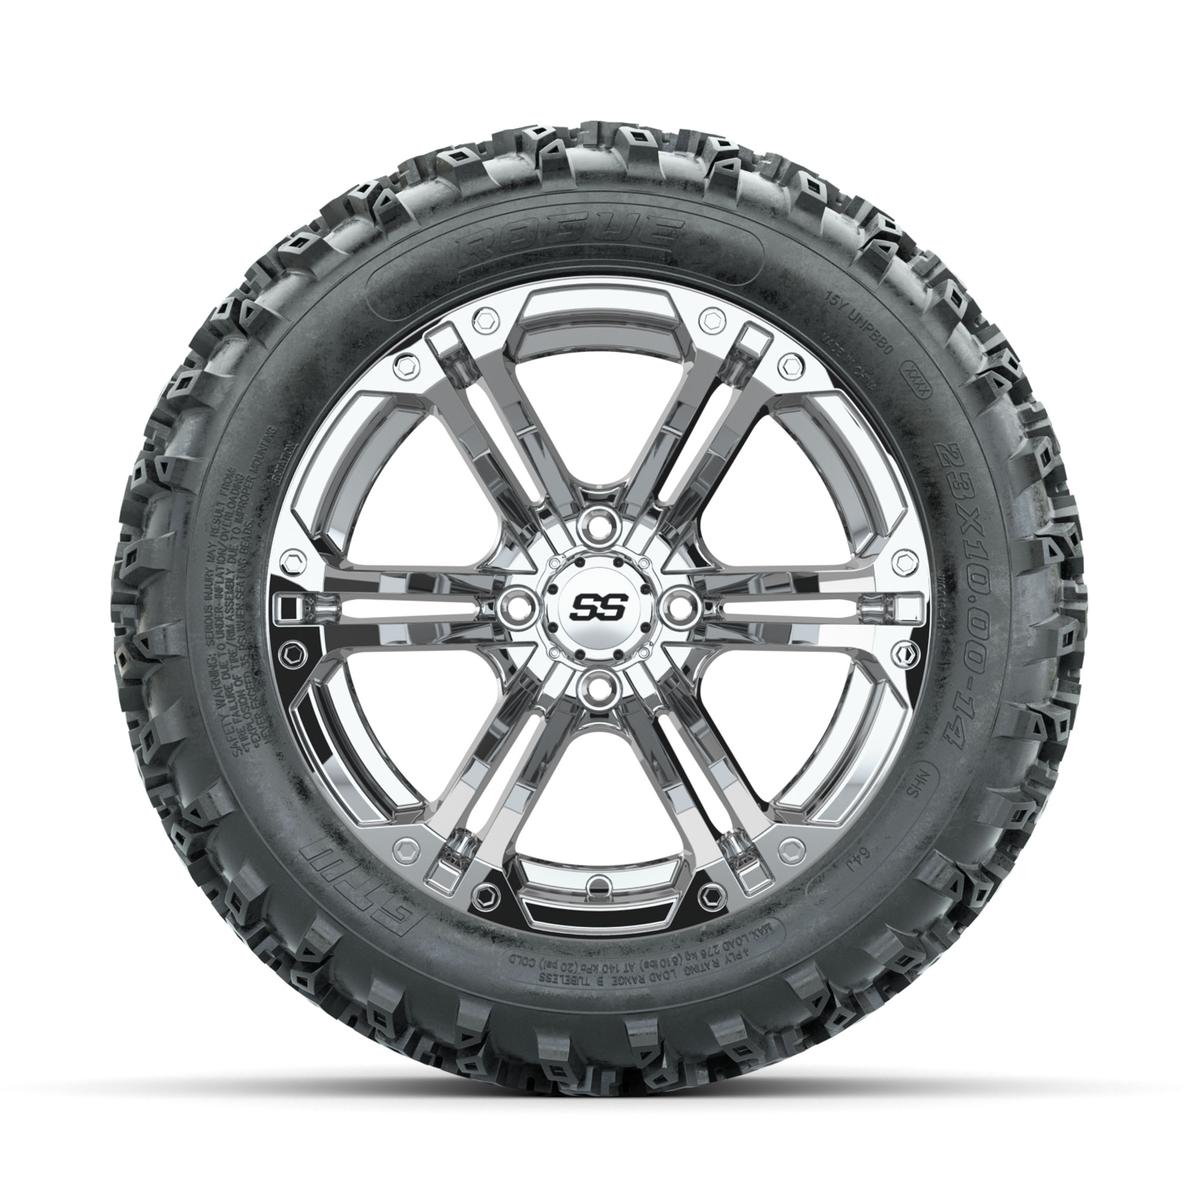 GTW Specter Chrome 14 in Wheels with 23x10.00-14 Rogue All Terrain Tires – Full Set